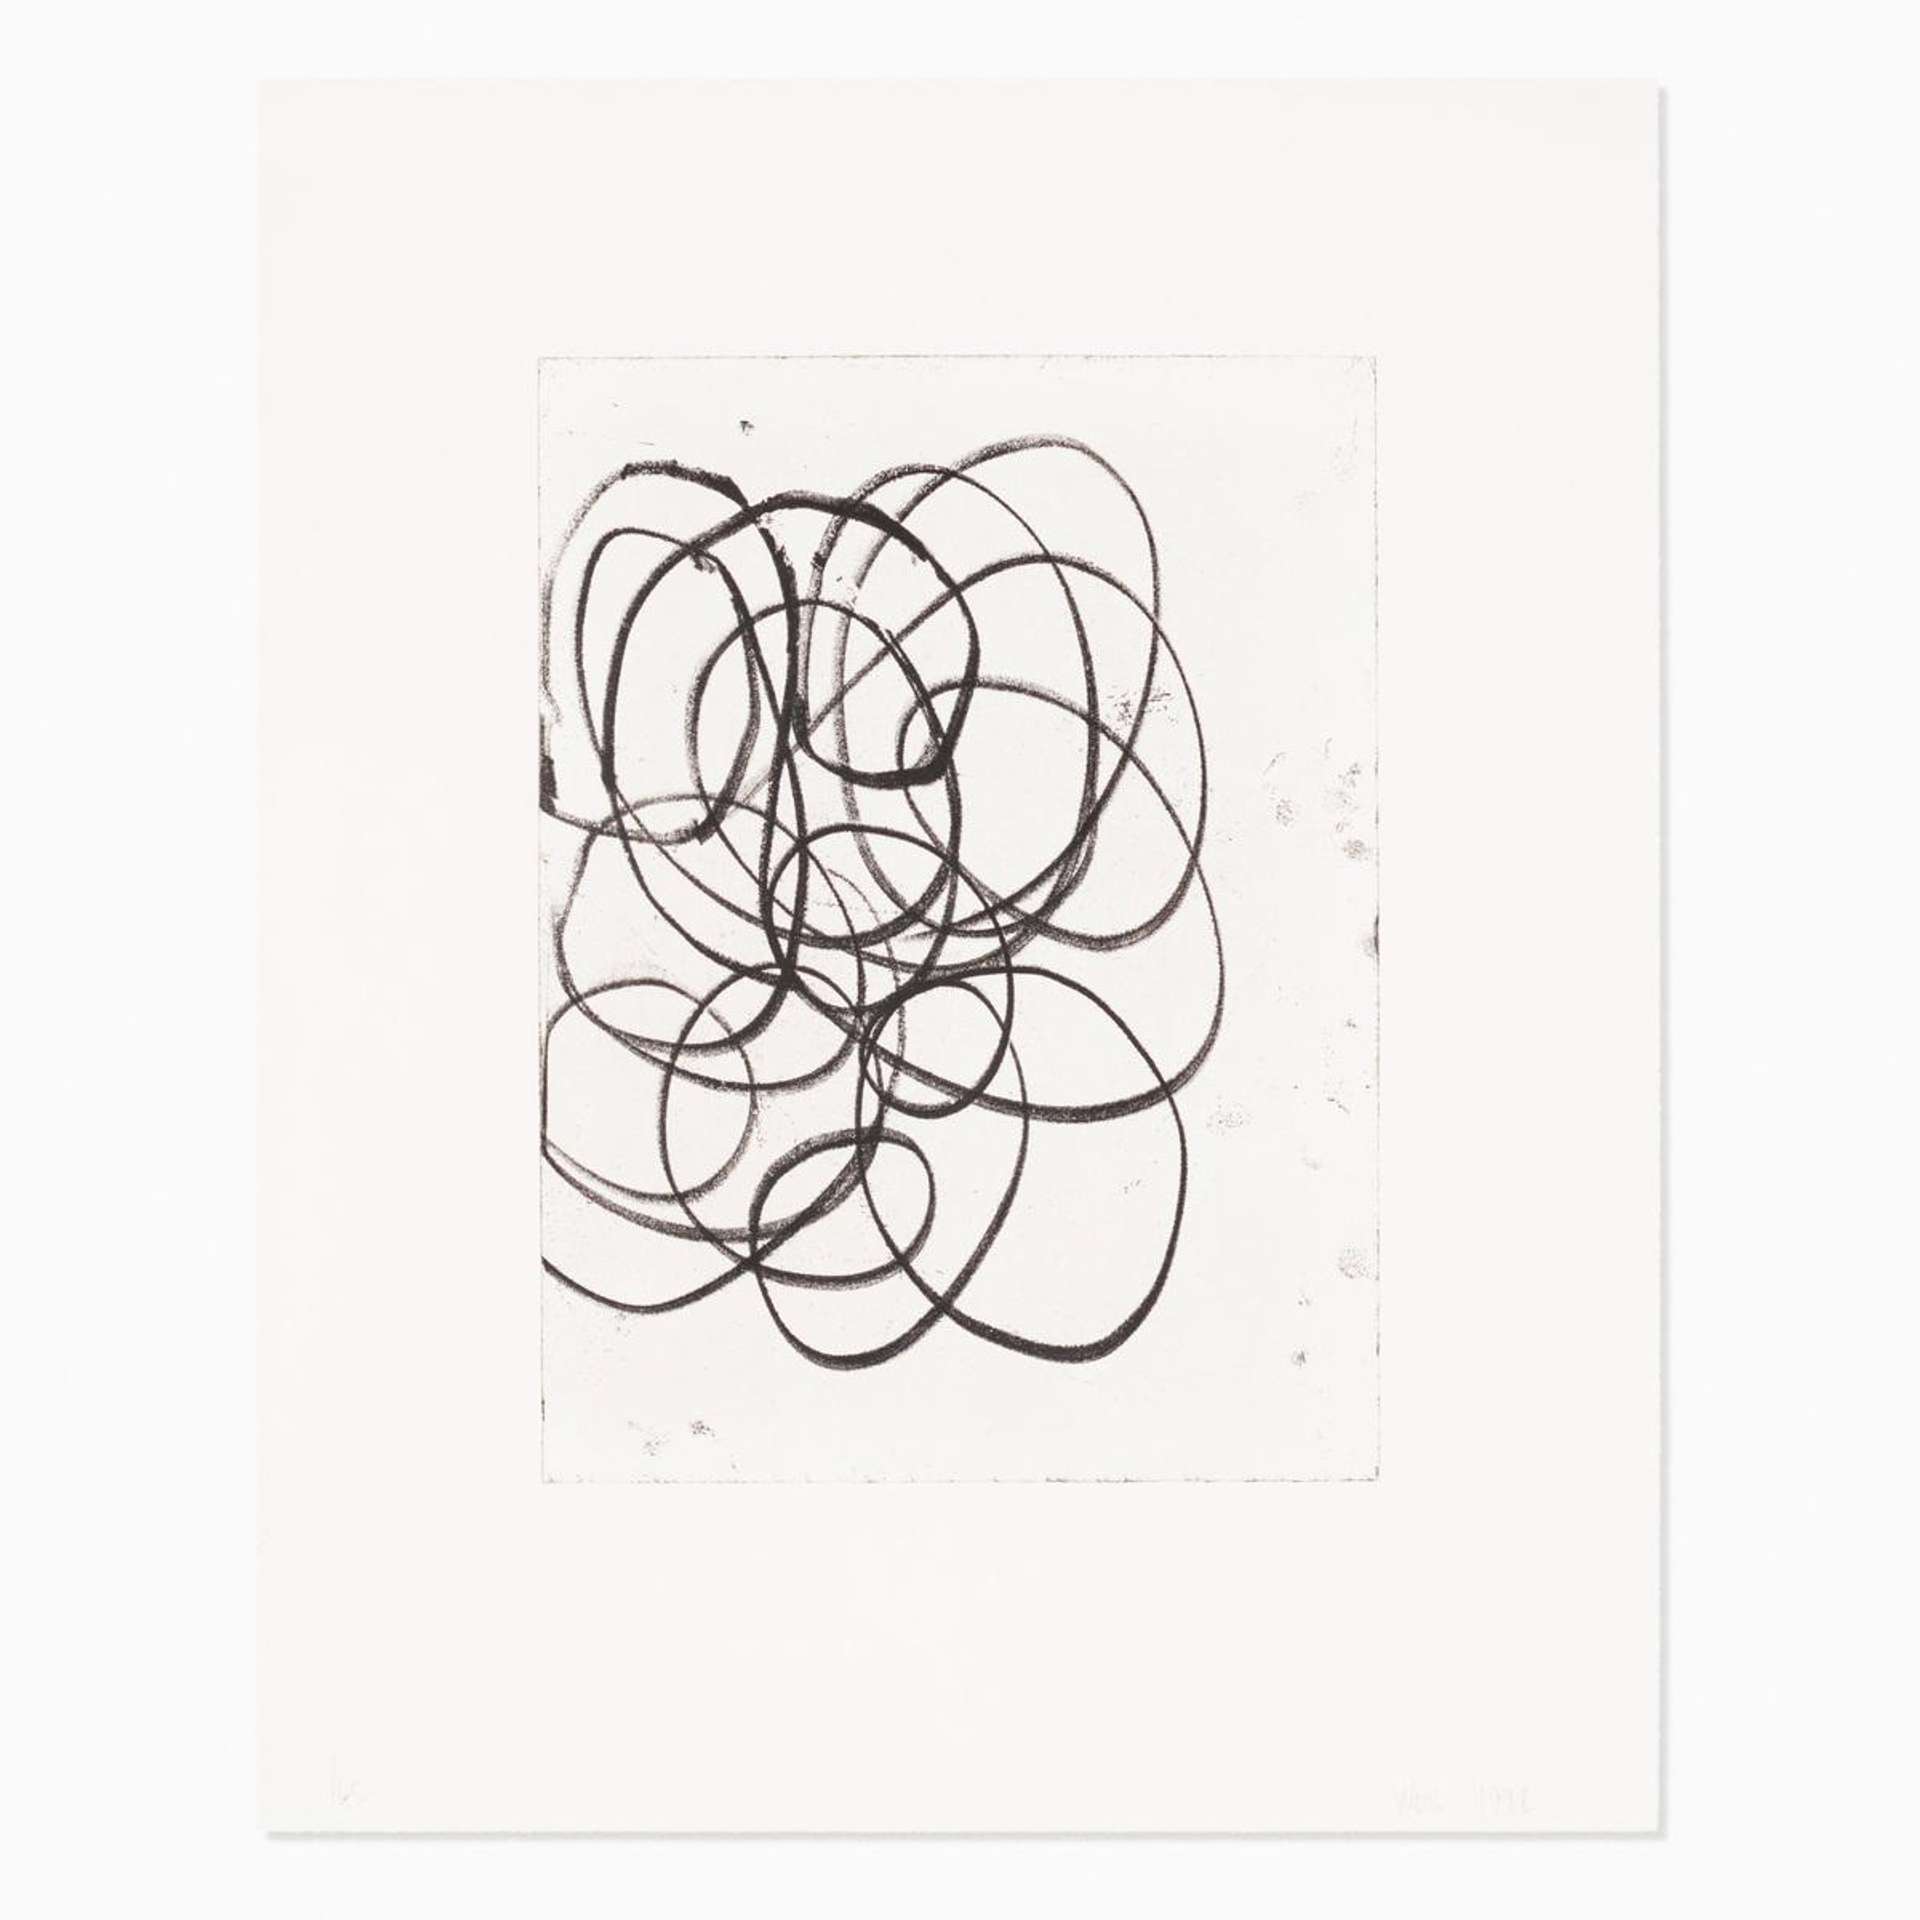 Christopher Wool: Untitled (1998) - Signed Print